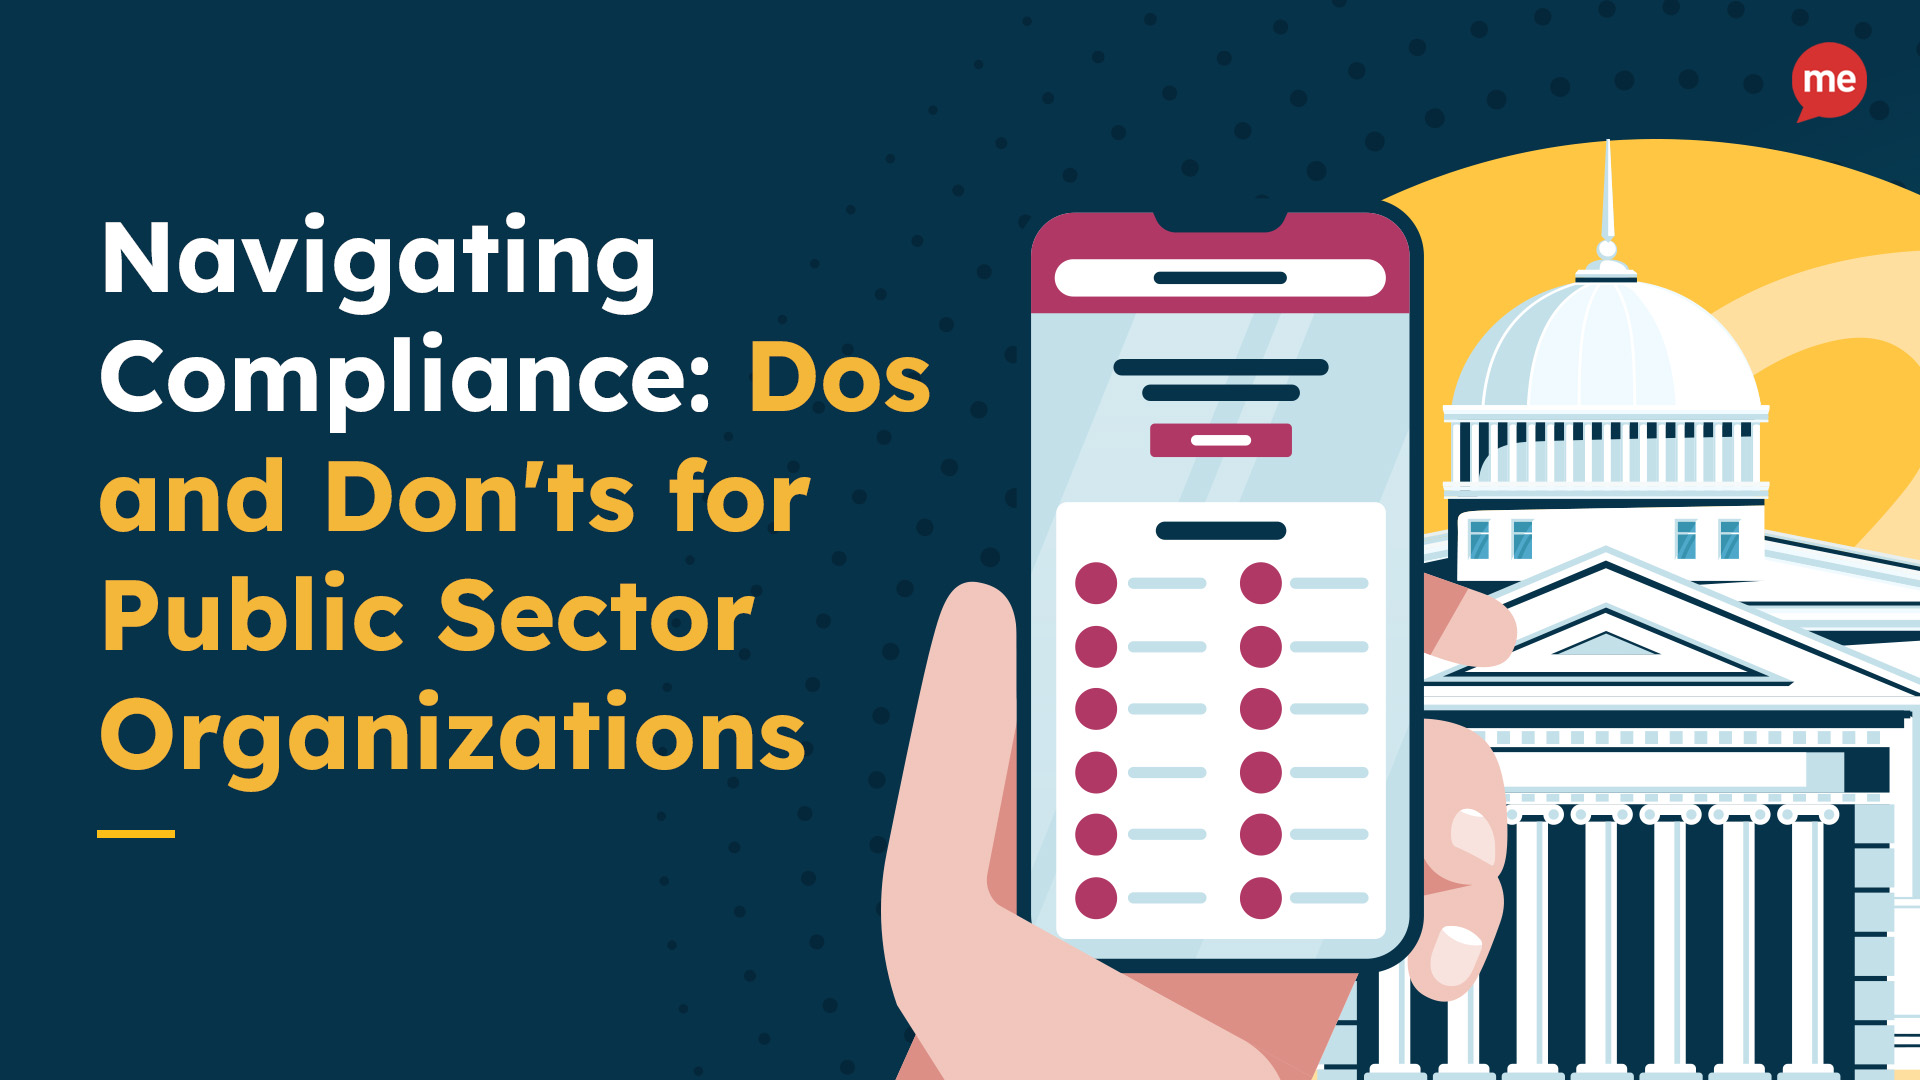 Navigating Compliance: Dos and Don’ts for Public Sector Organizations